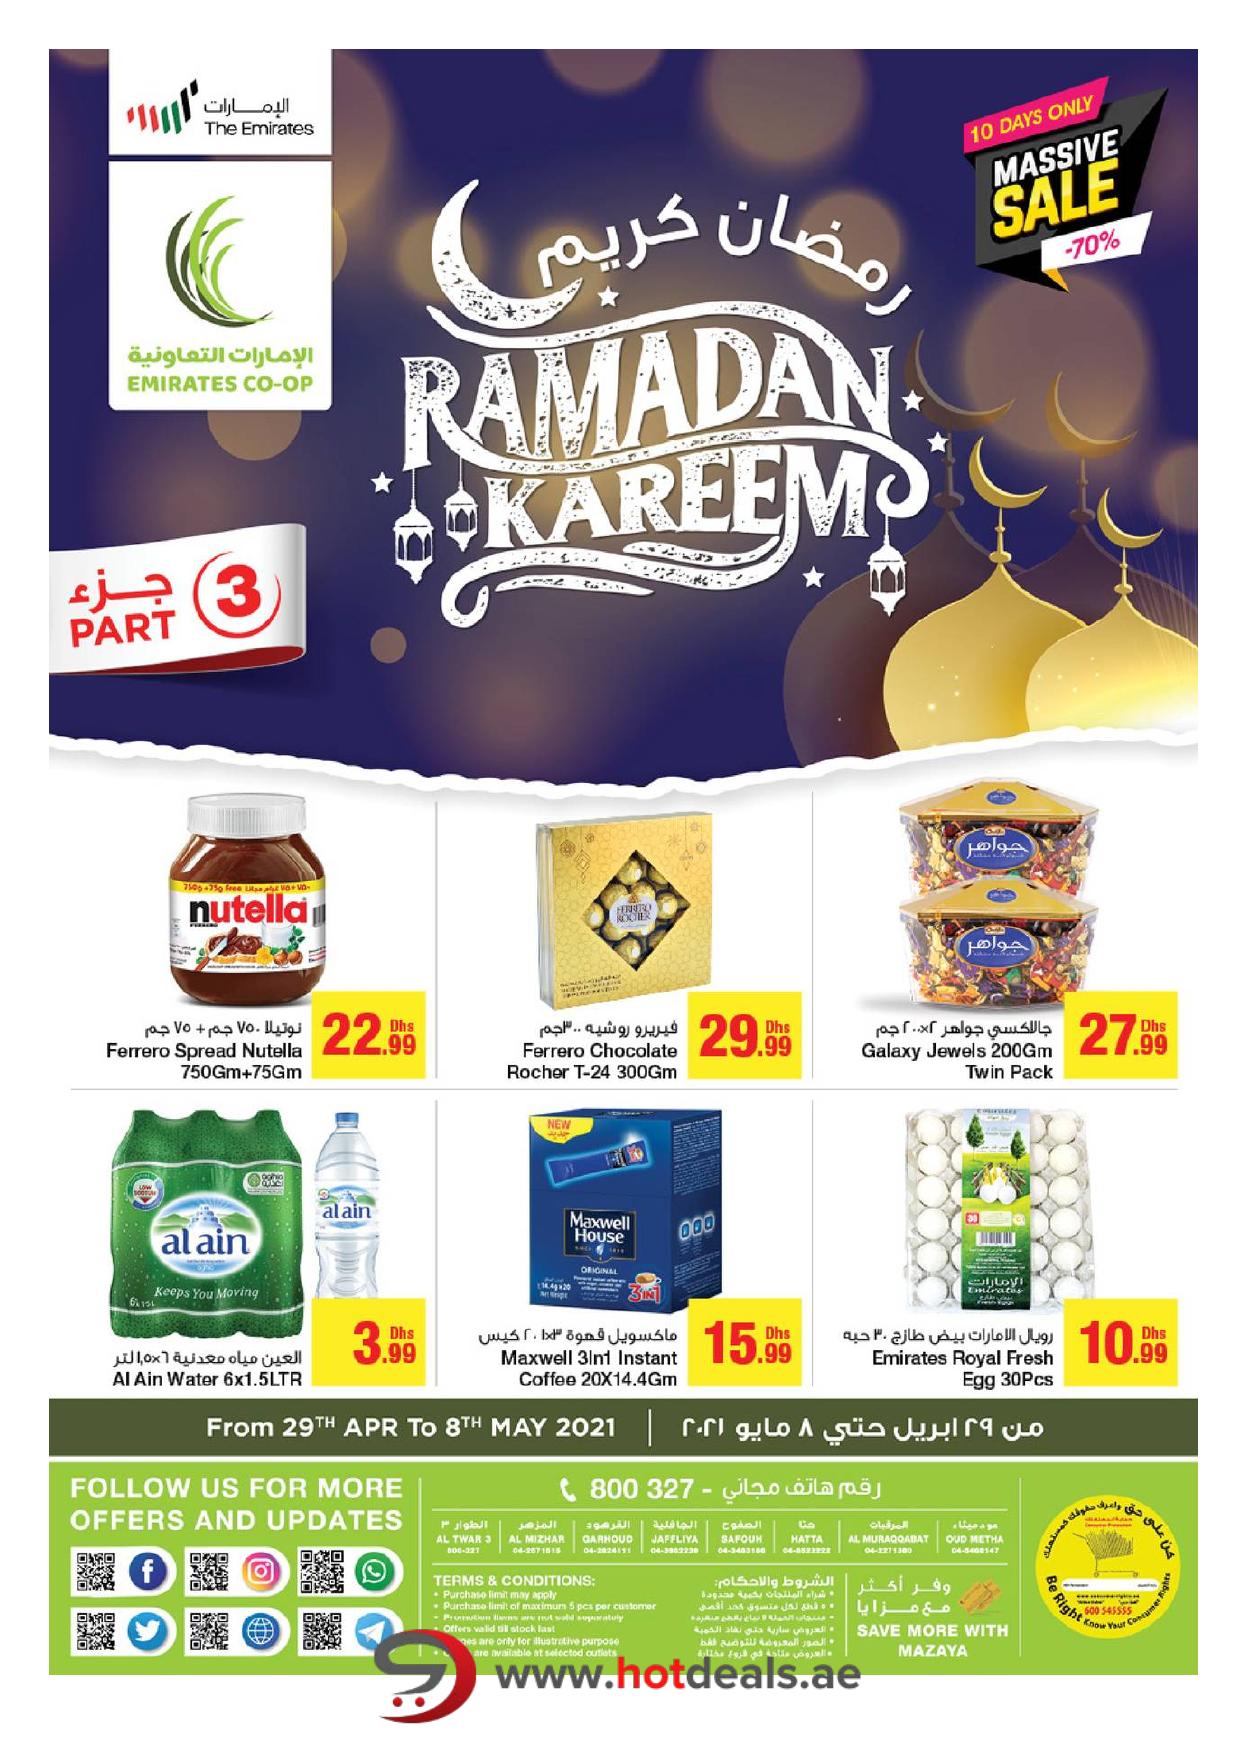 <p><span style="font-size: 18px;"><font color="#424242">Special Ramadan Offers</font></span><br></p>